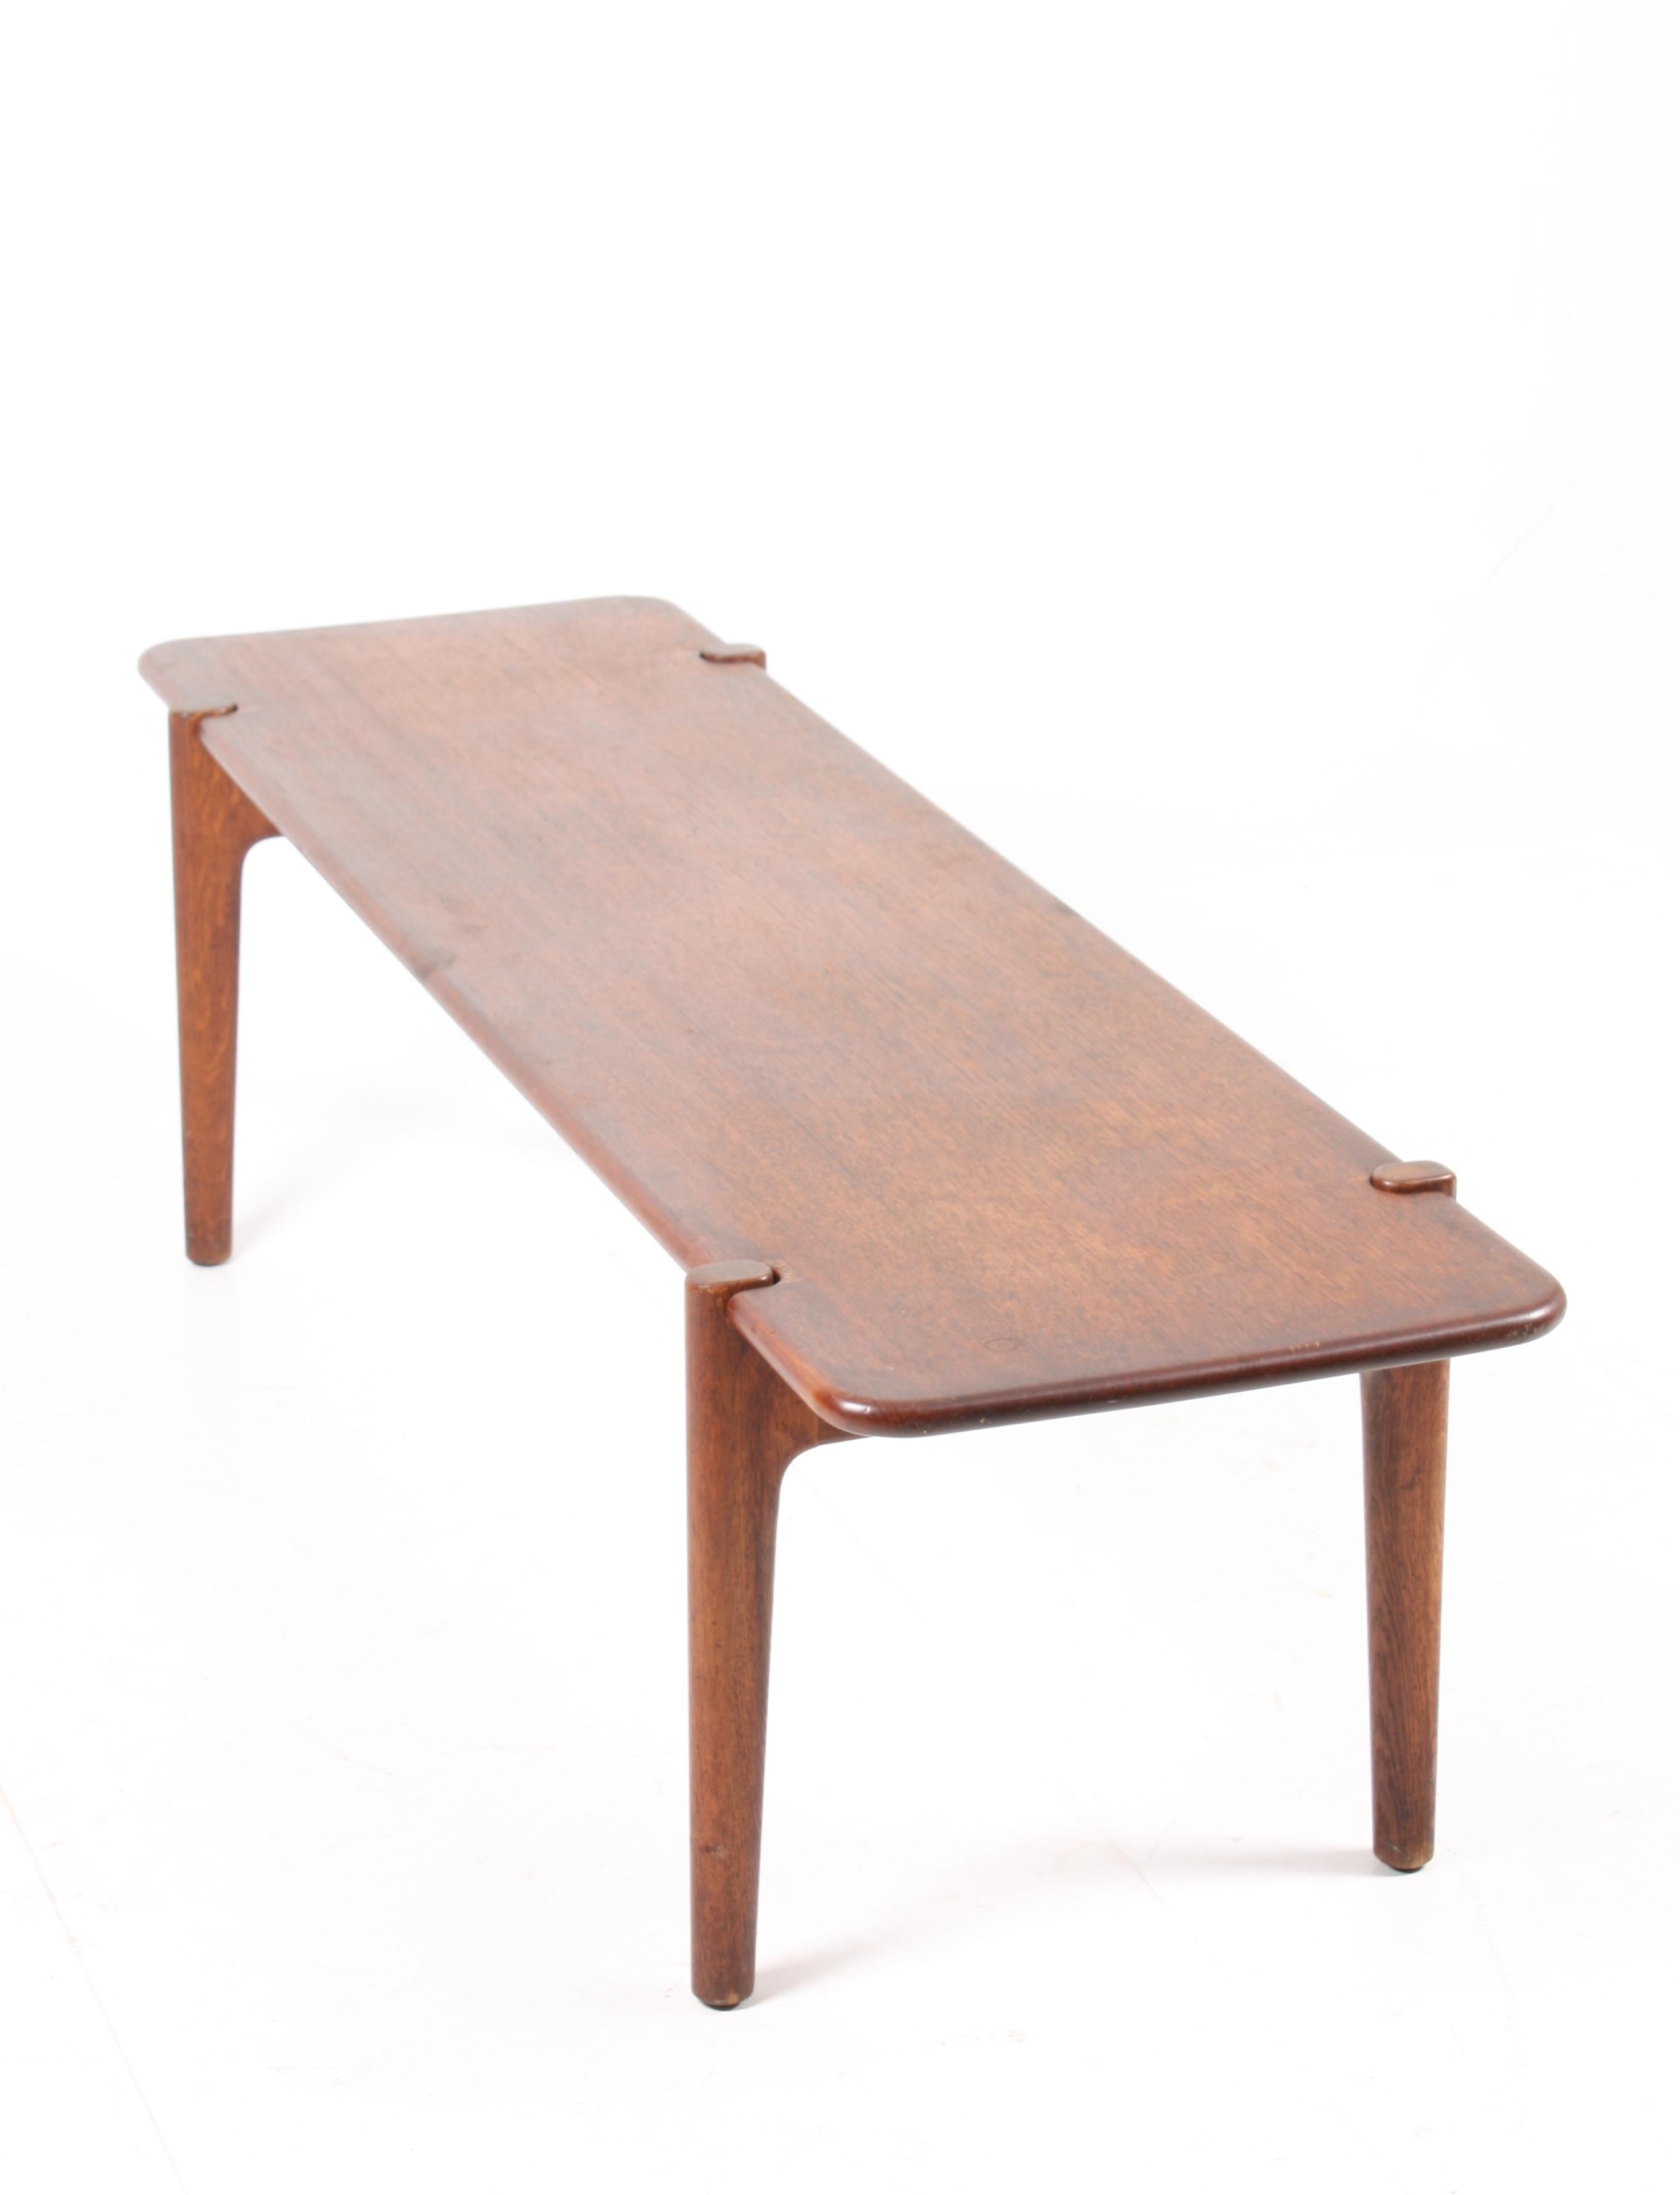 Can be used as bench or low table, solid oak frame with hardware in brass and a loose top in solid teak. Designed by Hans J Wegner for Johannes Hansen Cabinetmakers in 1957. Outstanding quality. Original condition.